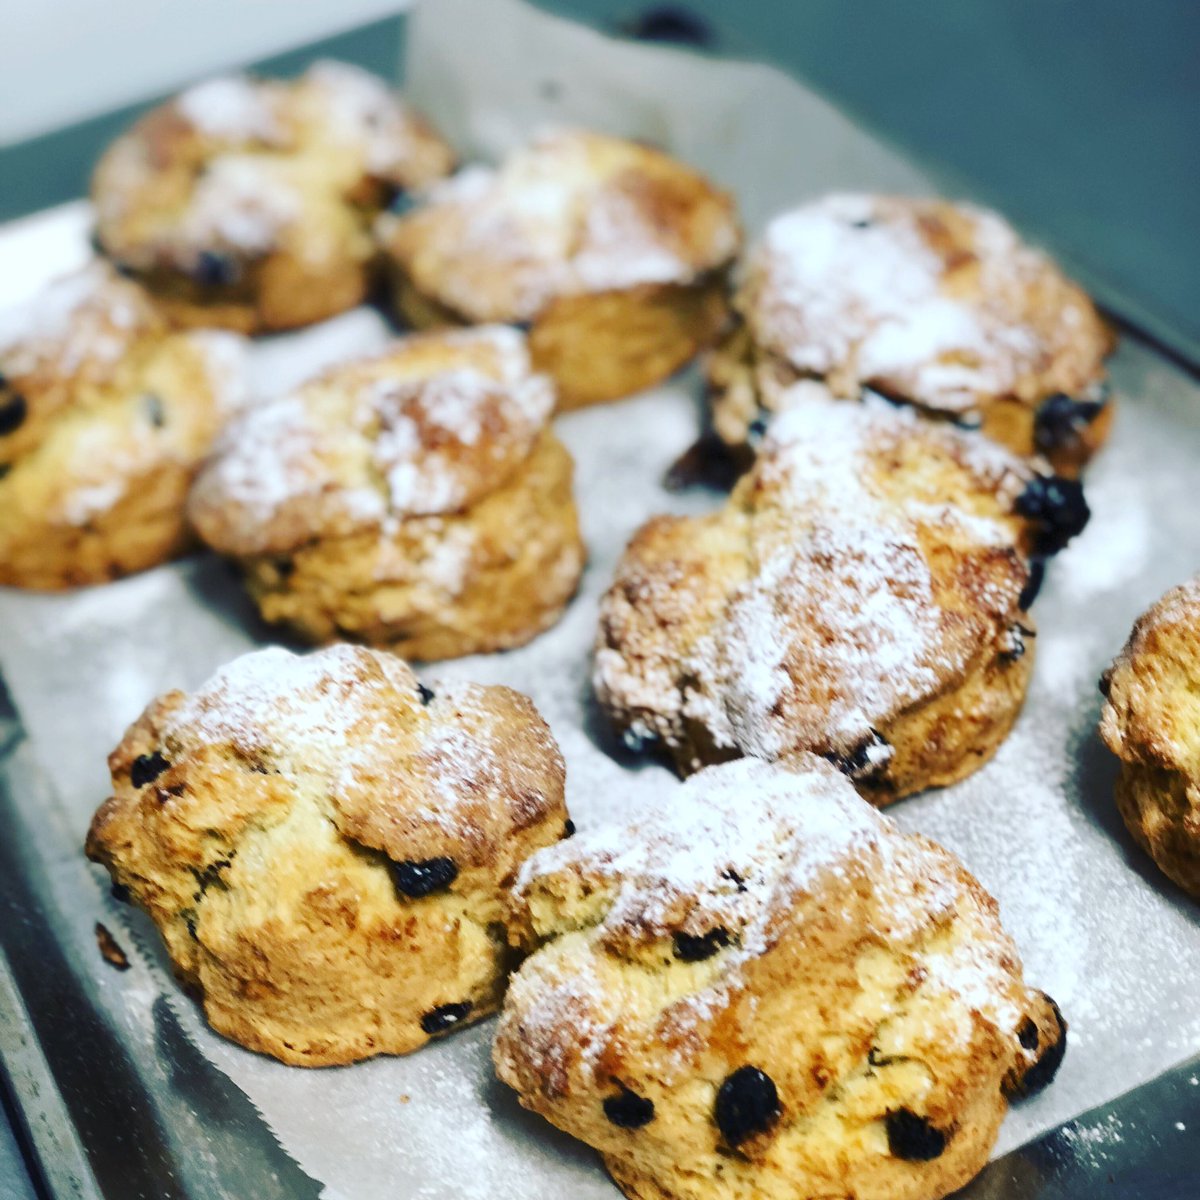 Scones freshly baked every morning, who’d like one with Irish ☘️ butter and homemade preserve 🍓? #scones #baking #everymorning #irishbutter #irish #jam #preserve #intheiven #cheflife #foodofinstagram #foodie #cakesofinstagram